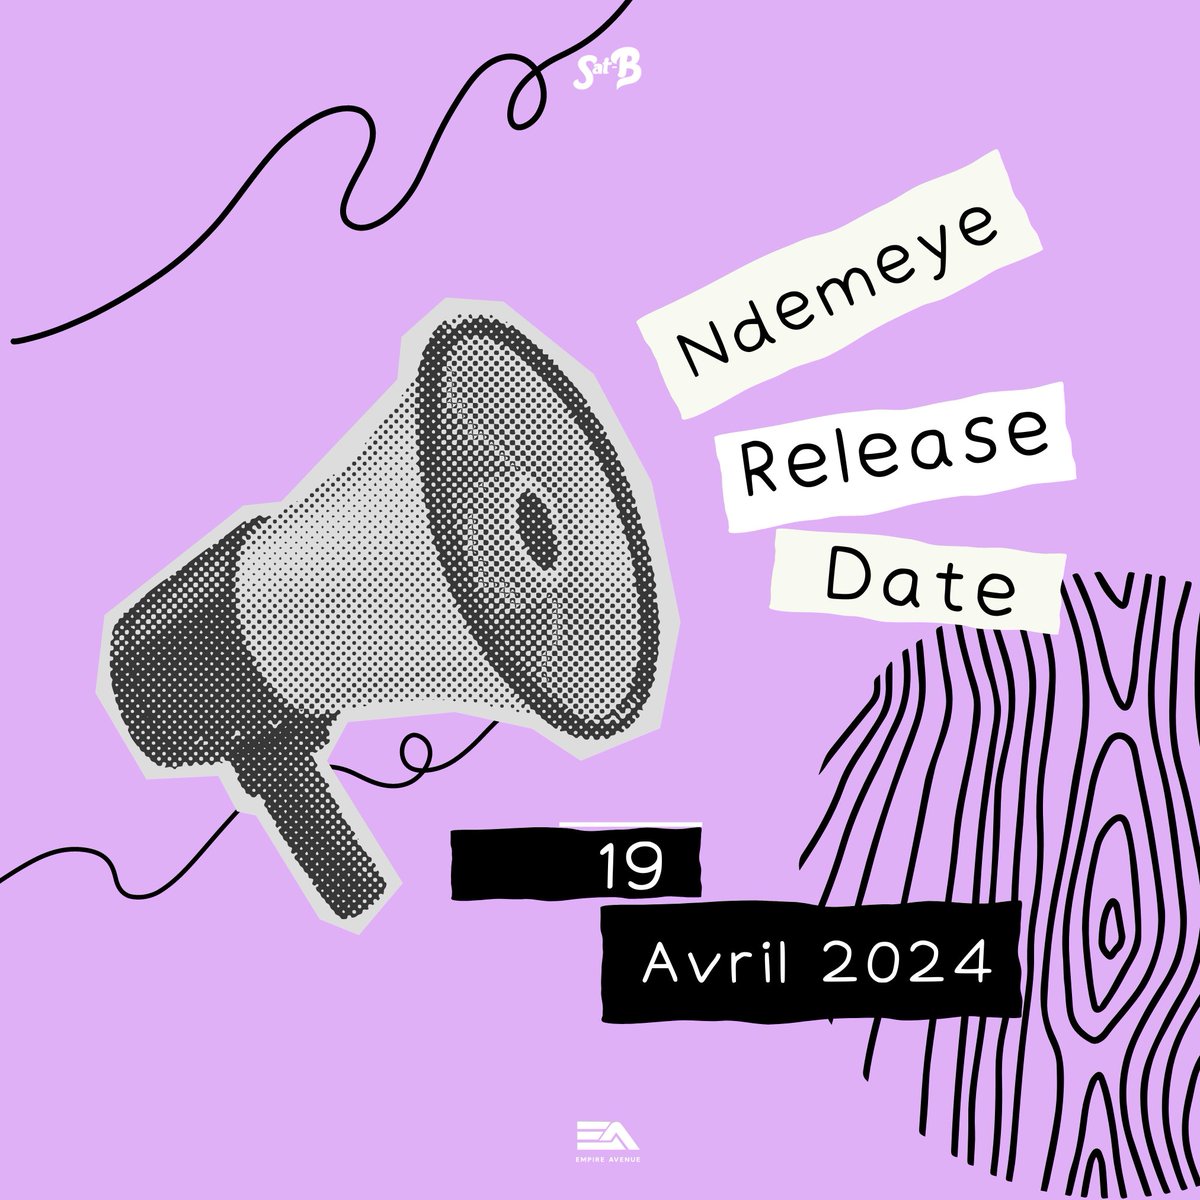 🗓️ Mark your calendars! The release date for ‘Ndemeye’ is just around the corner. Get ready to immerse yourself in a world of rhythm and romance on 19th April 2024. Stay tuned for more exciting updates! 🎶 #Ndemeye